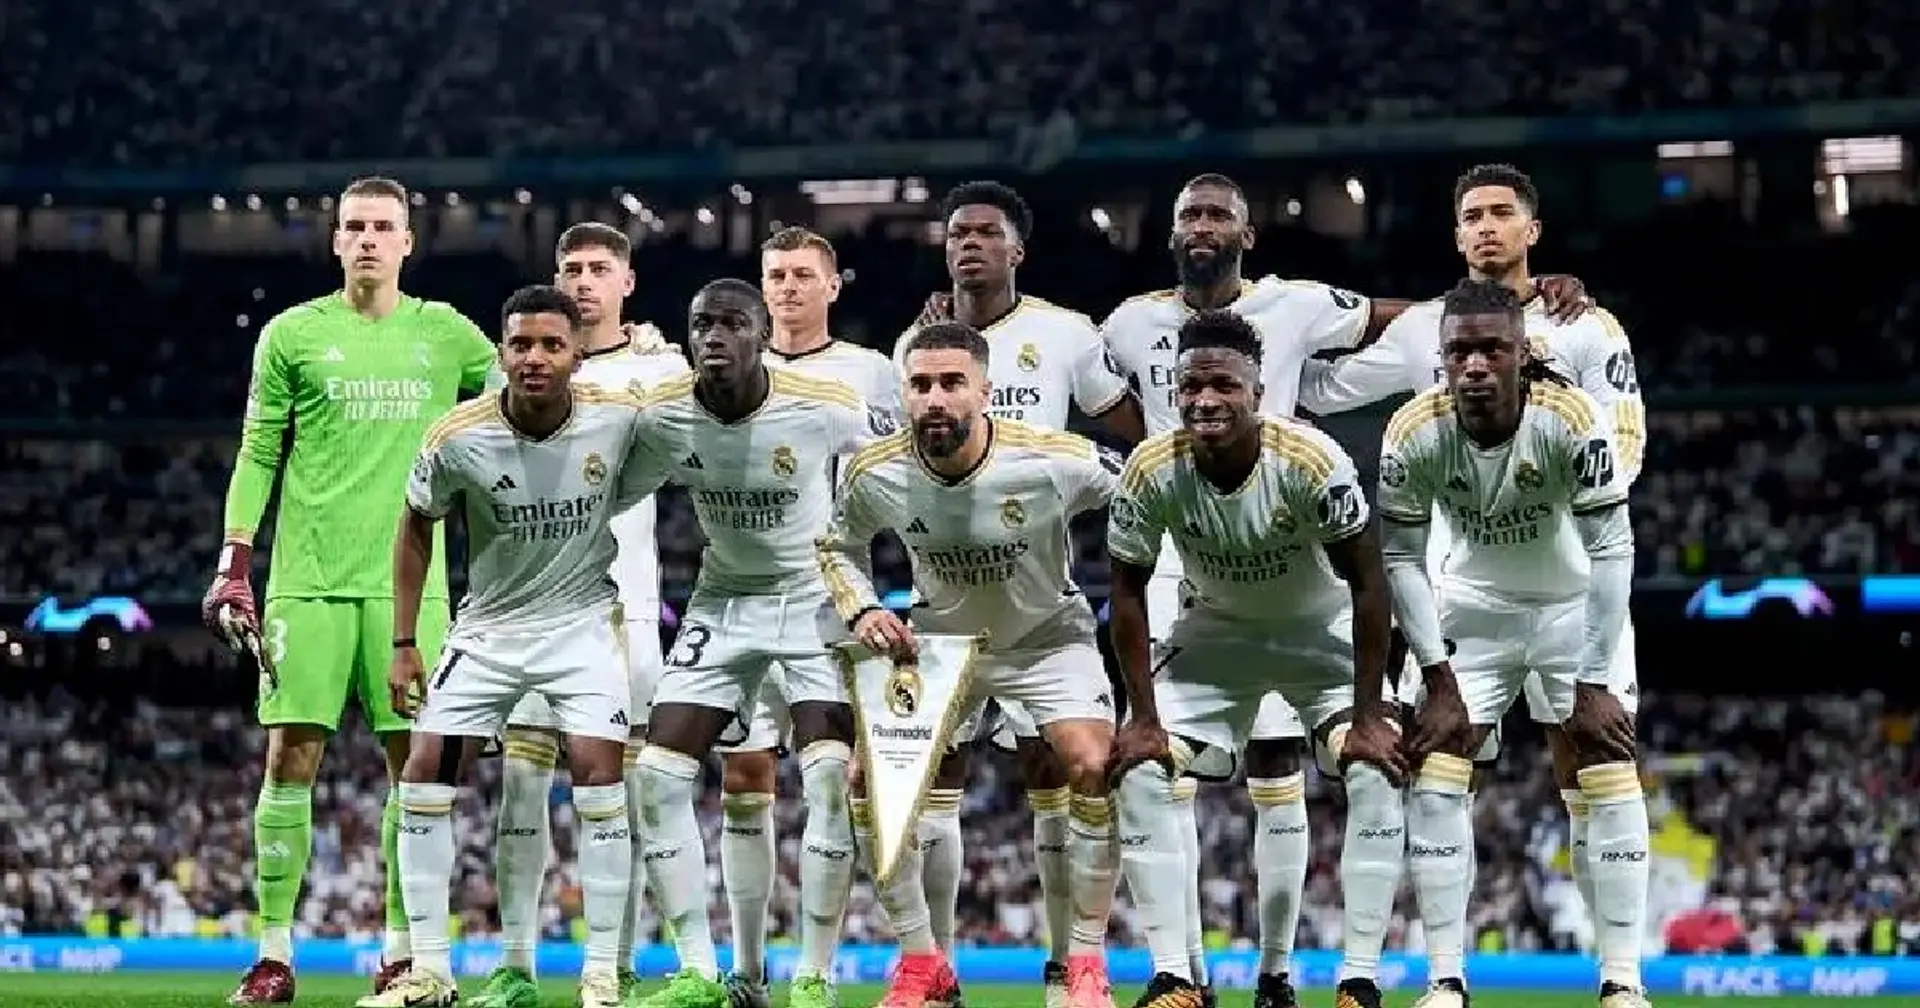 Key player missing from squad for Man City & 2 other big Real Madrid stories you might've missed